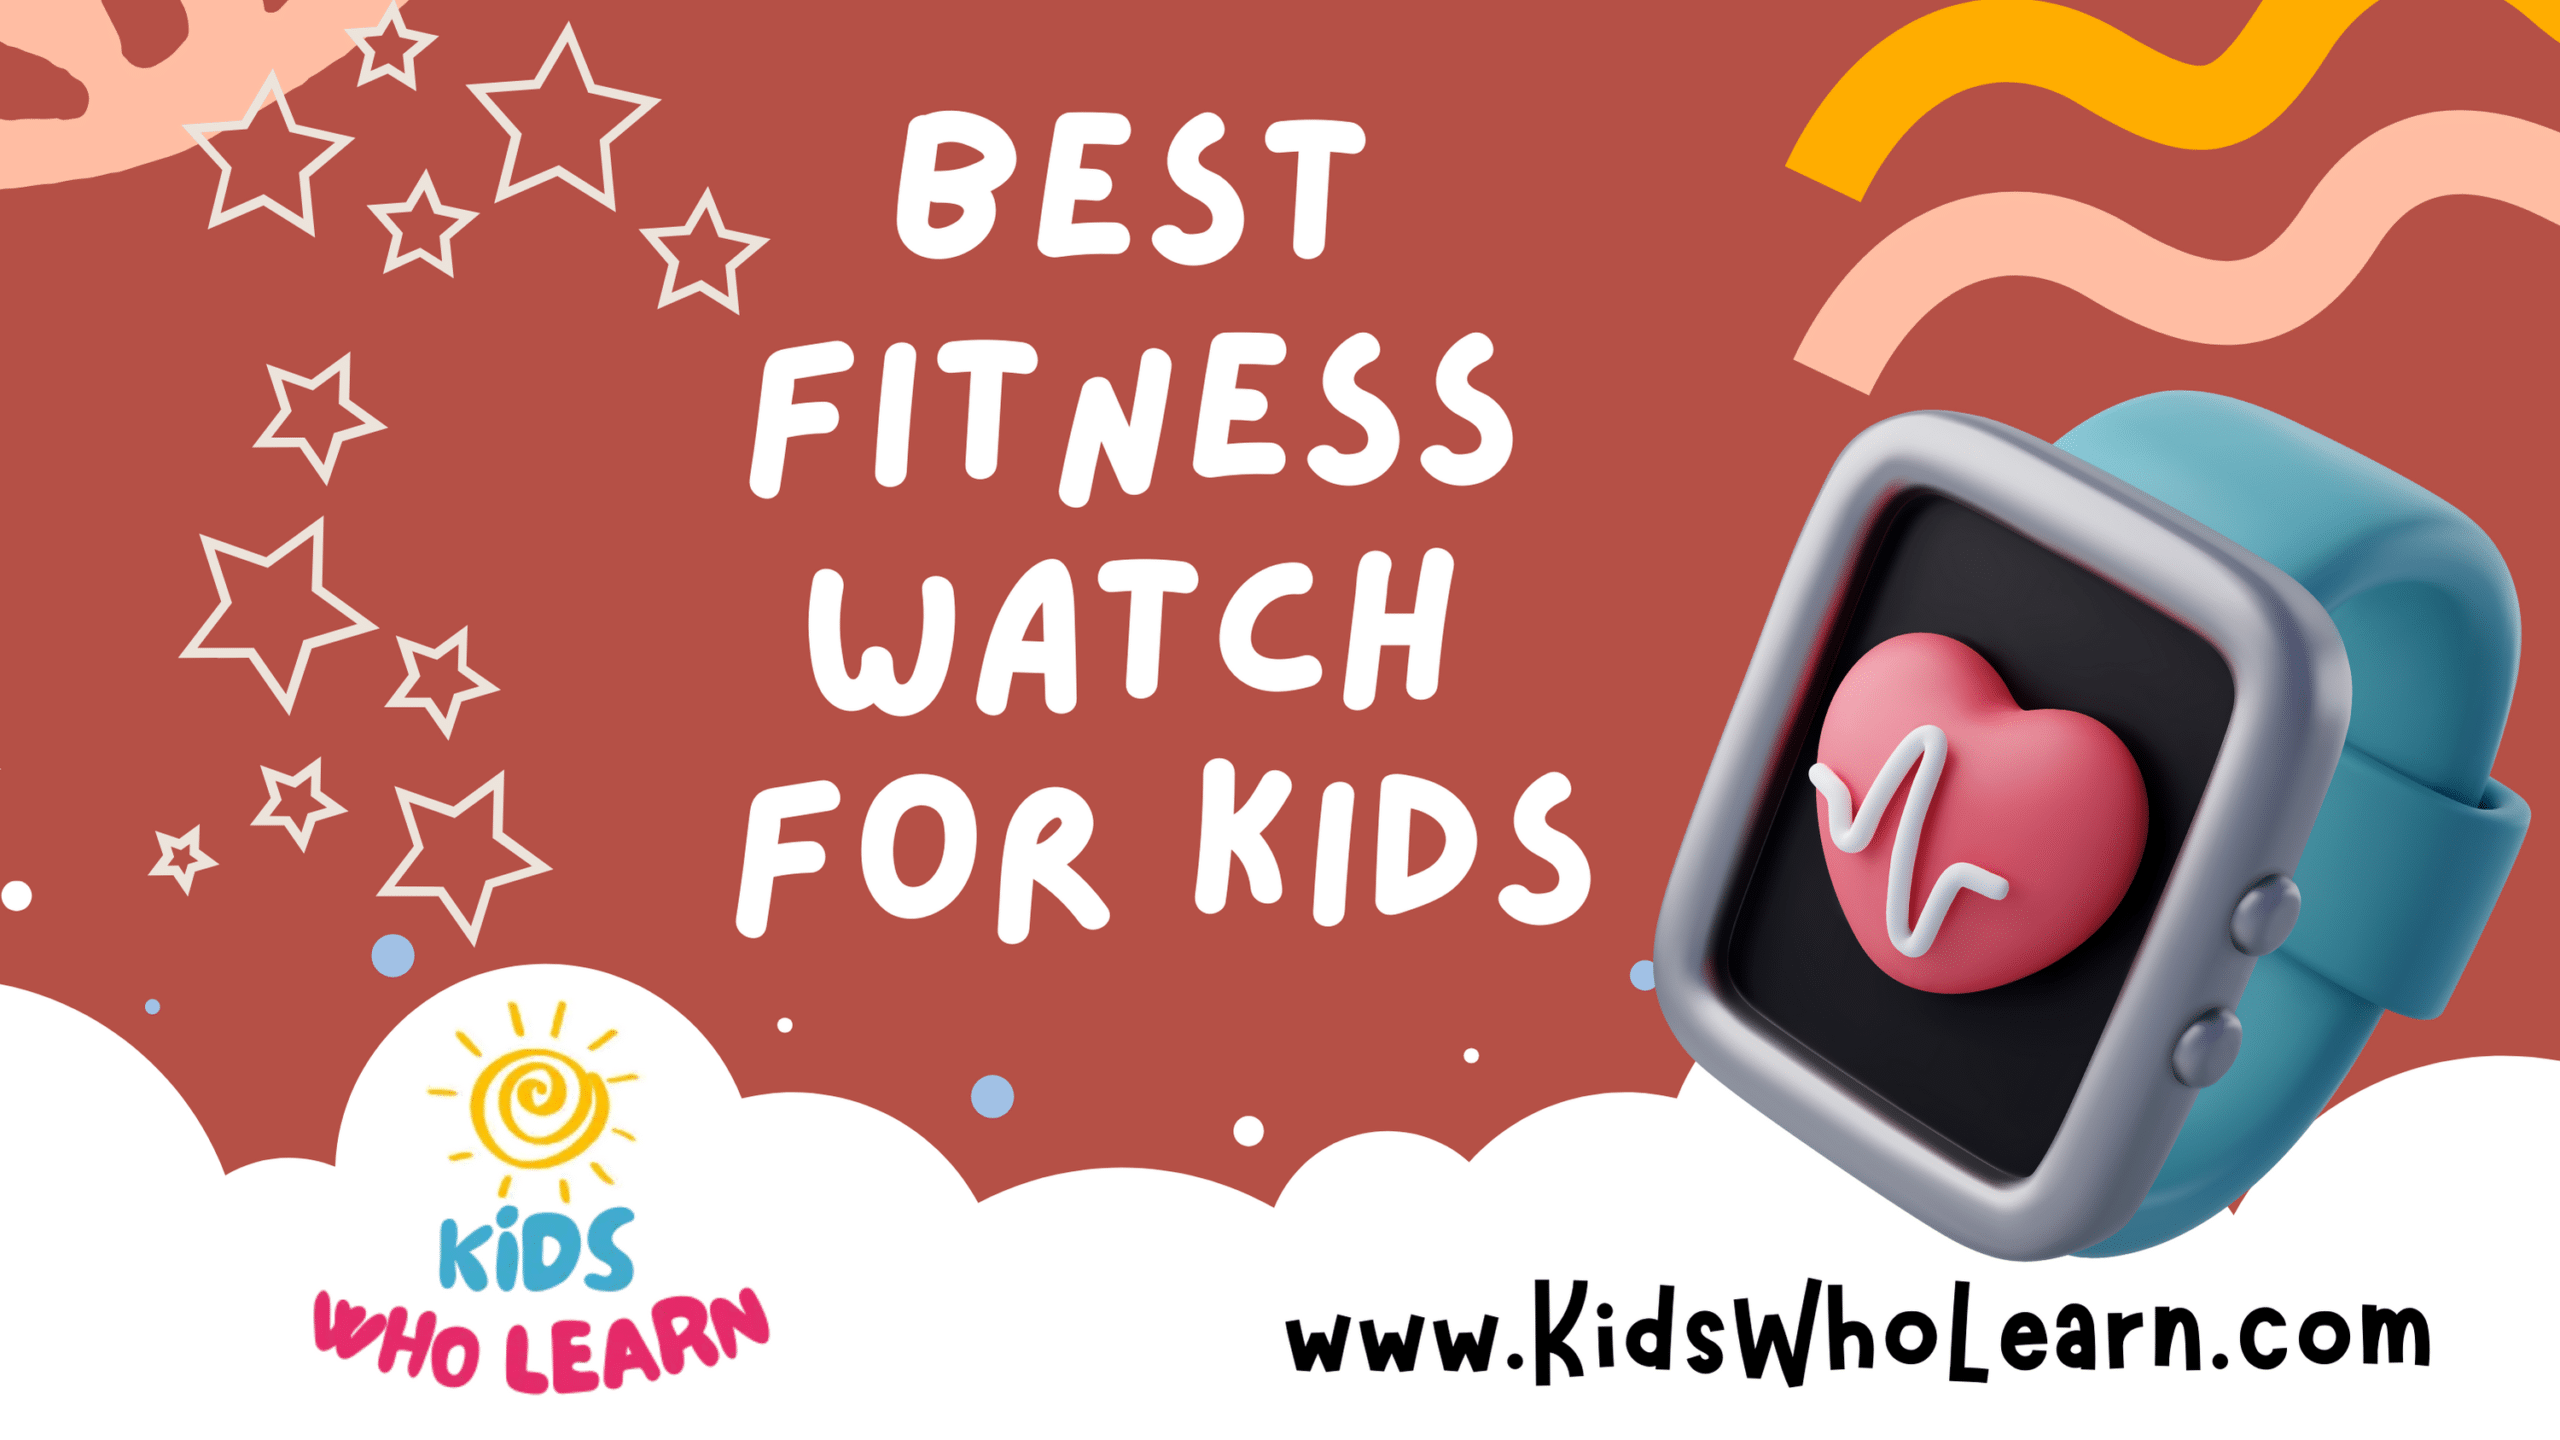 The Best Fitness Watch for Kids: for an Active Generation